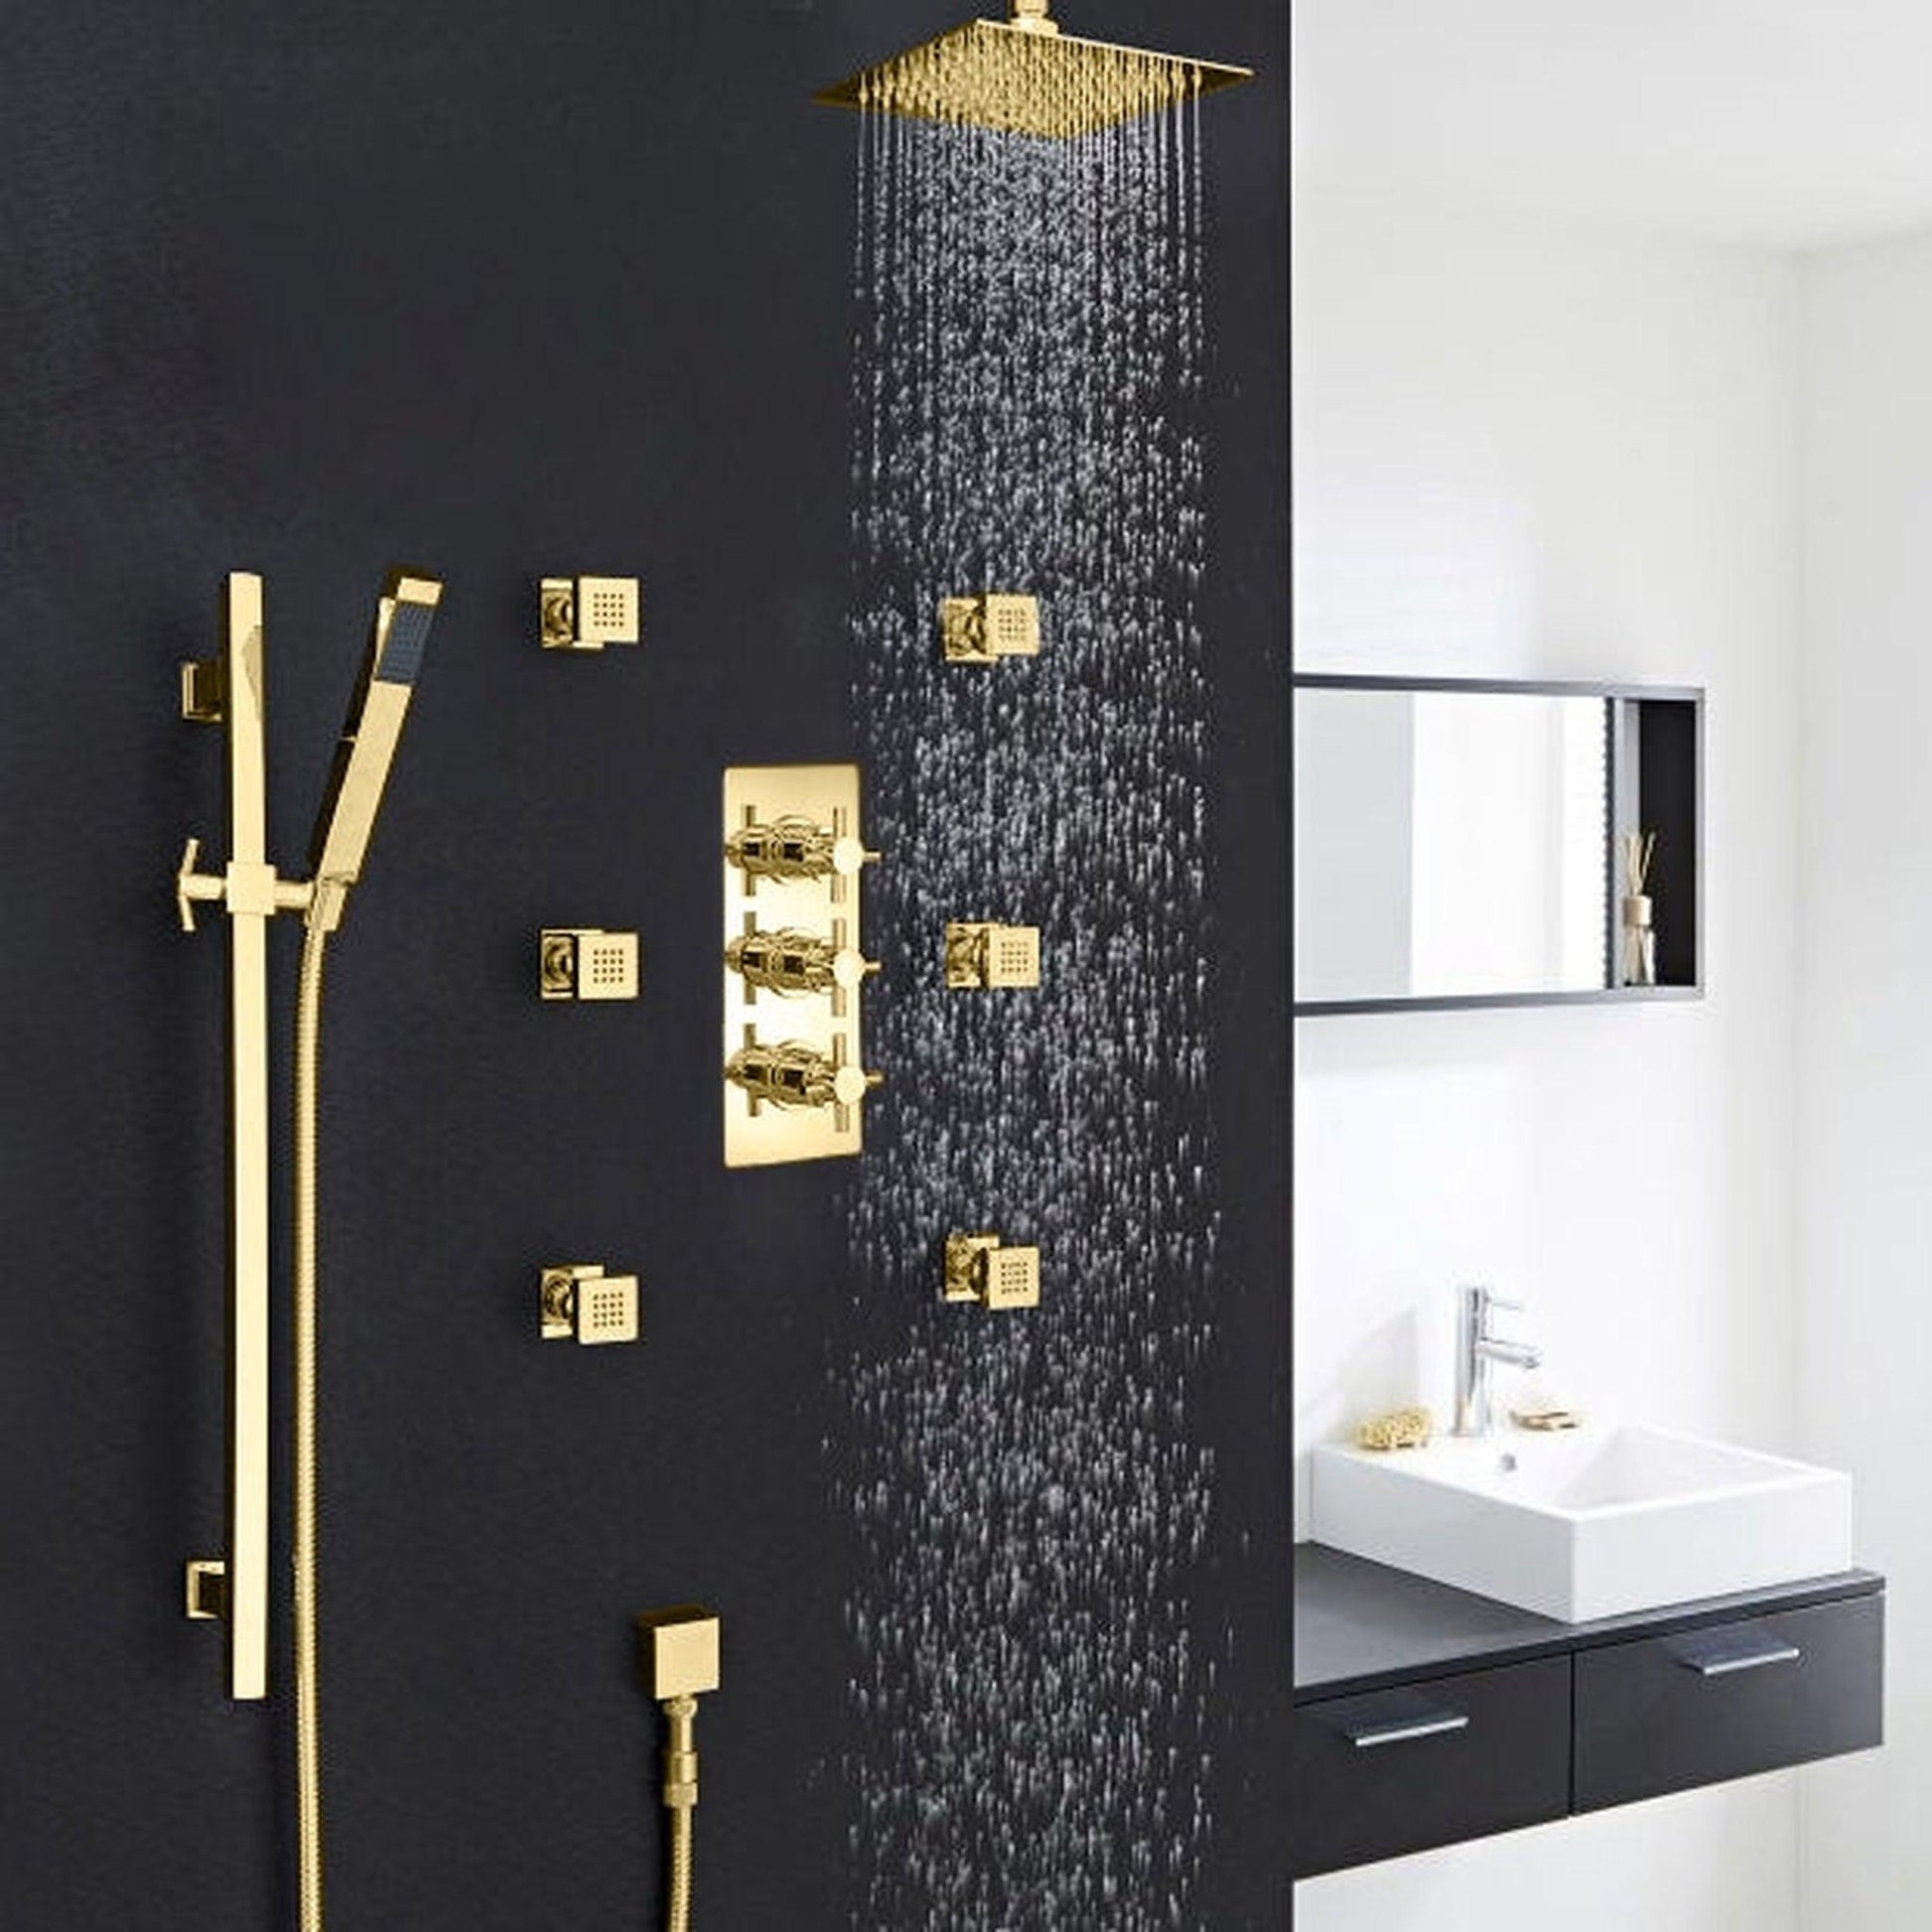 Fontana Reno 10" Gold Square Ceiling Mounted Rainfall Shower System With 6-Body Massage Jets and Hand Shower